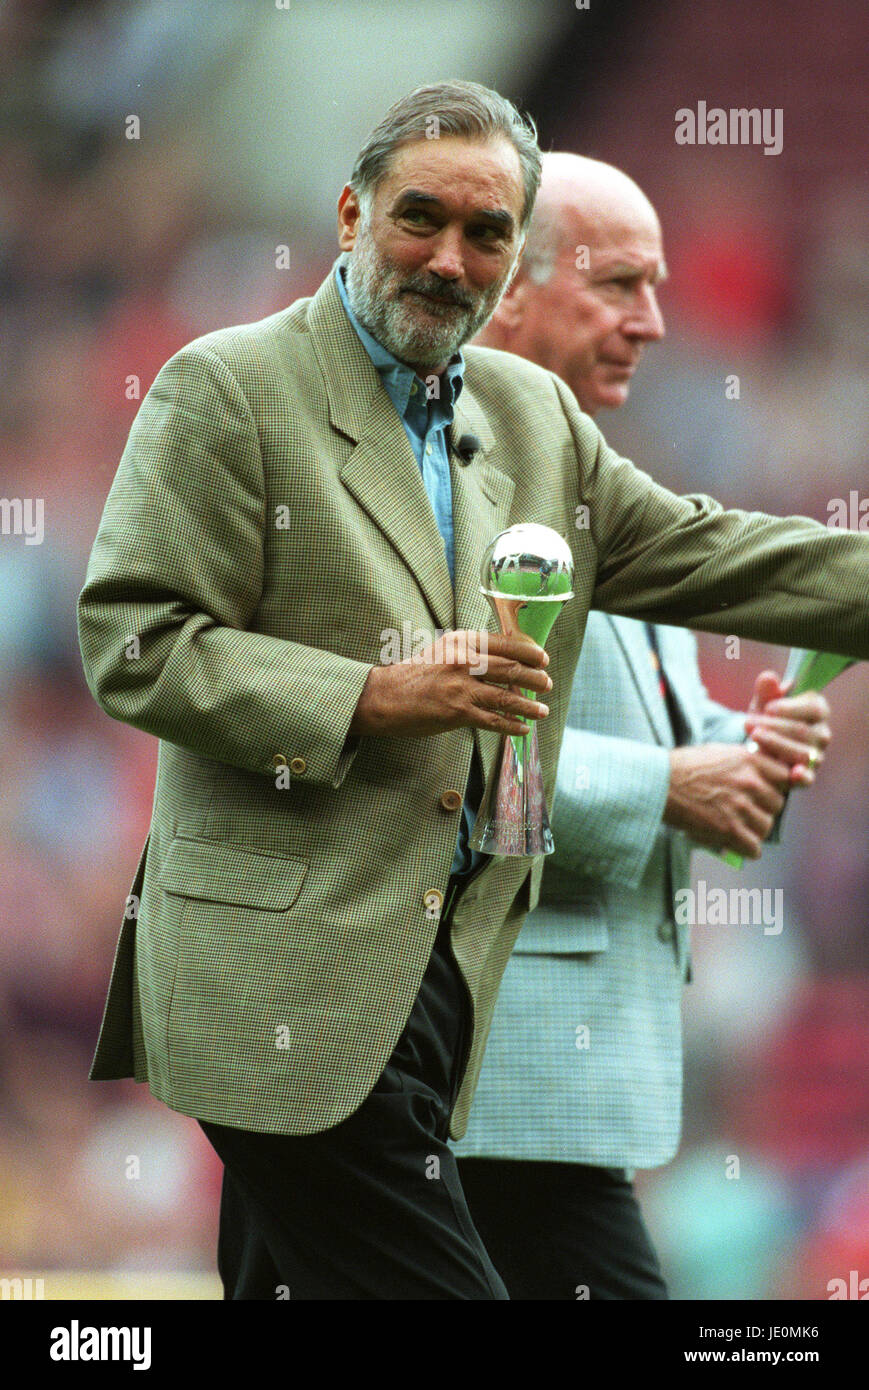 GEORGE BEST MANCHESTER UNITED FC 20 August 2000 Stock Photo